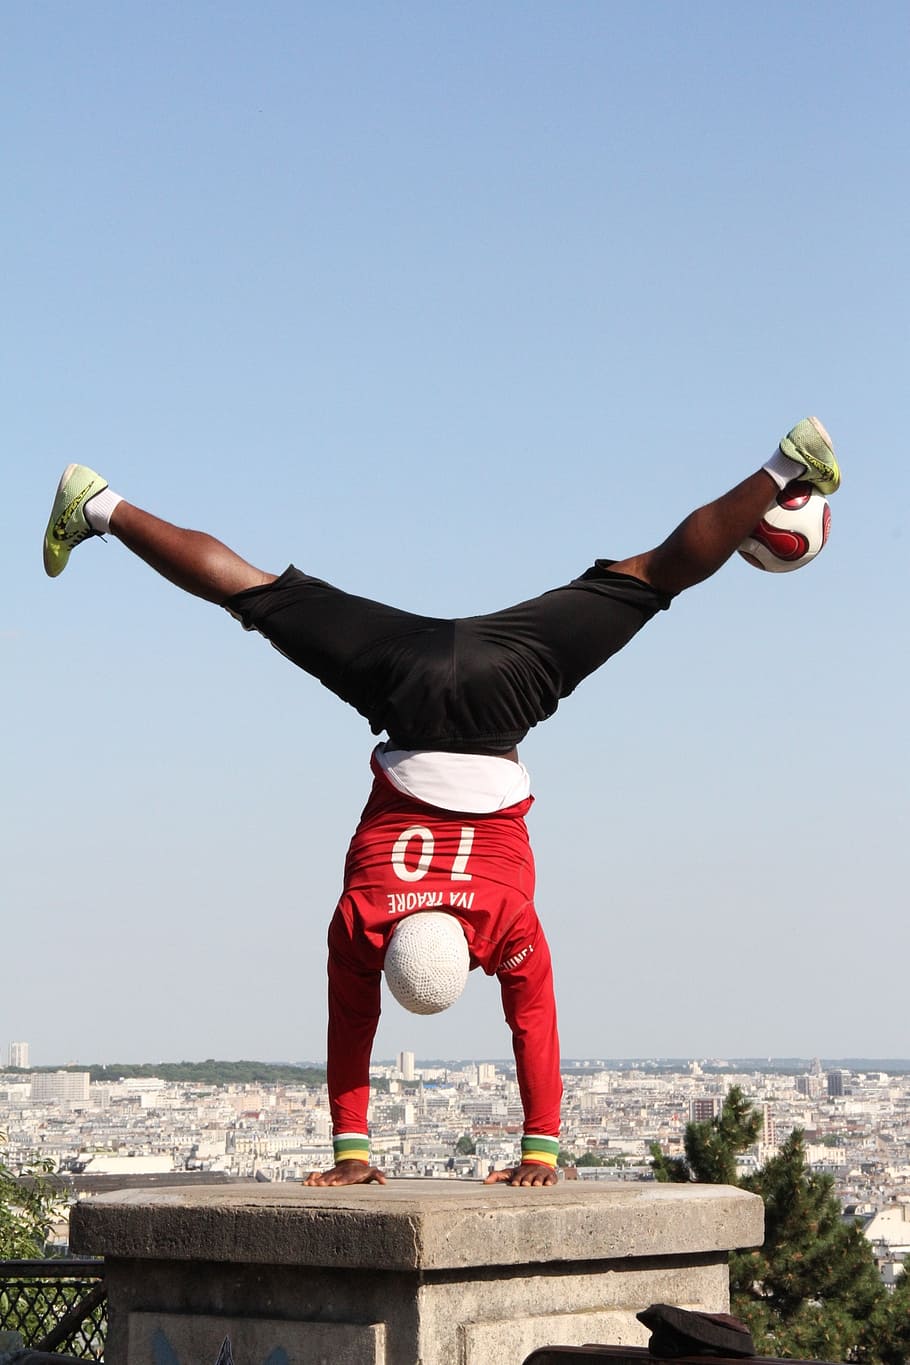 busker, soccer, street performer, paris france, sky, one person, clear sky, full length, lifestyles, copy space